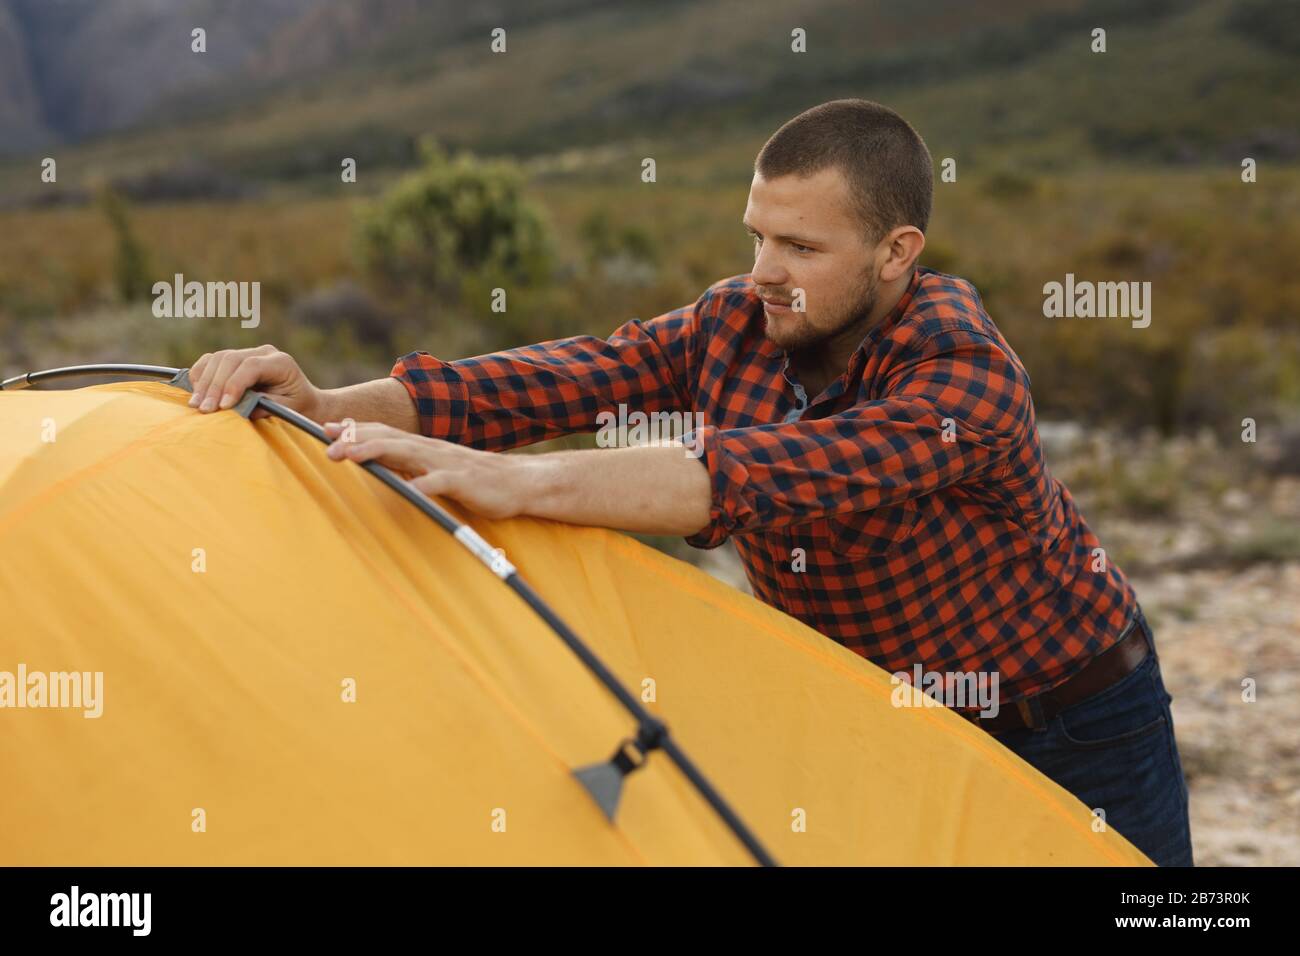 Side view of man installing the tent Stock Photo